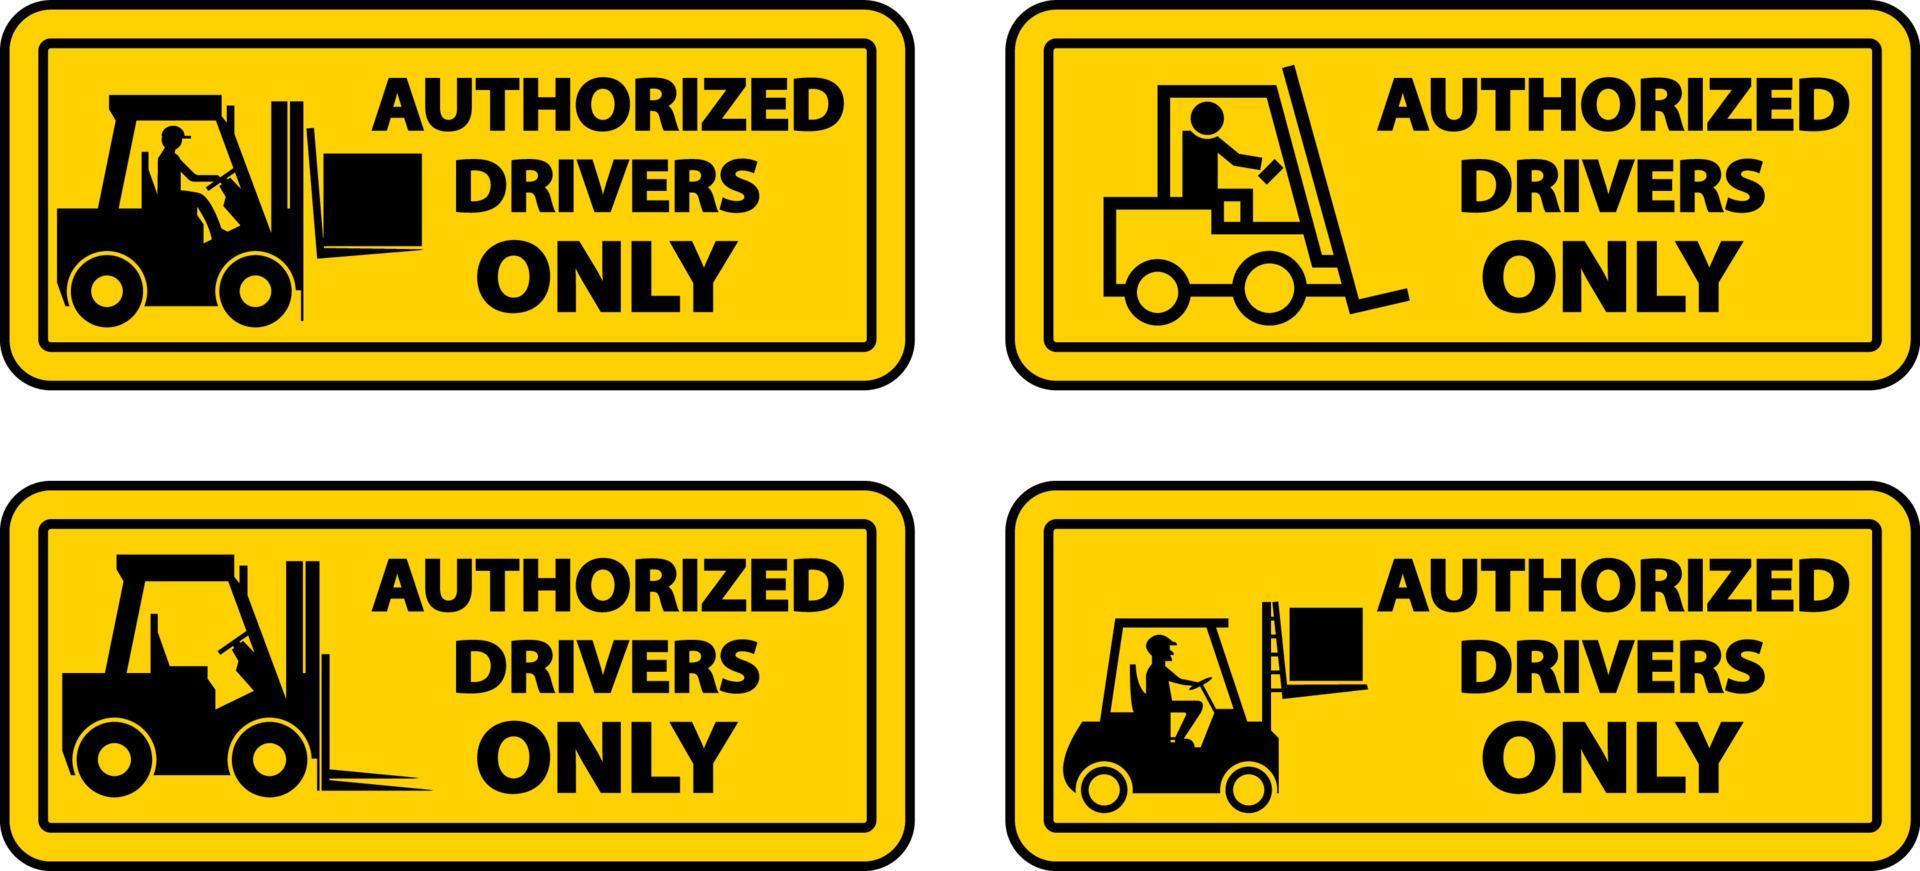 Authorized Drivers Only Label Sign On White Background vector